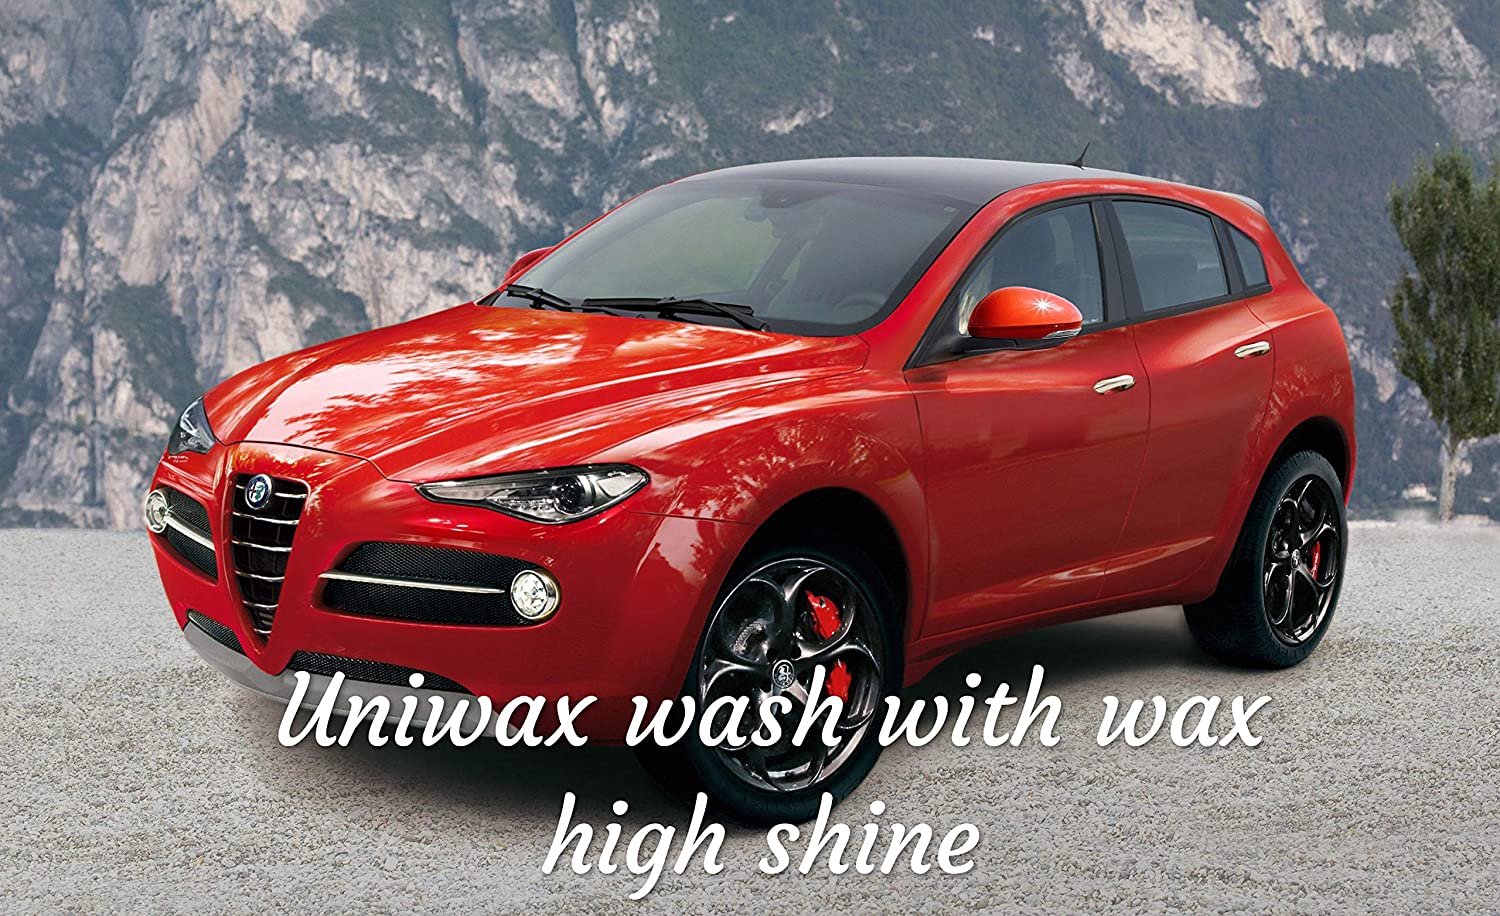 uniwax-car-wash-plus-wax-high-concentrated-1-kg